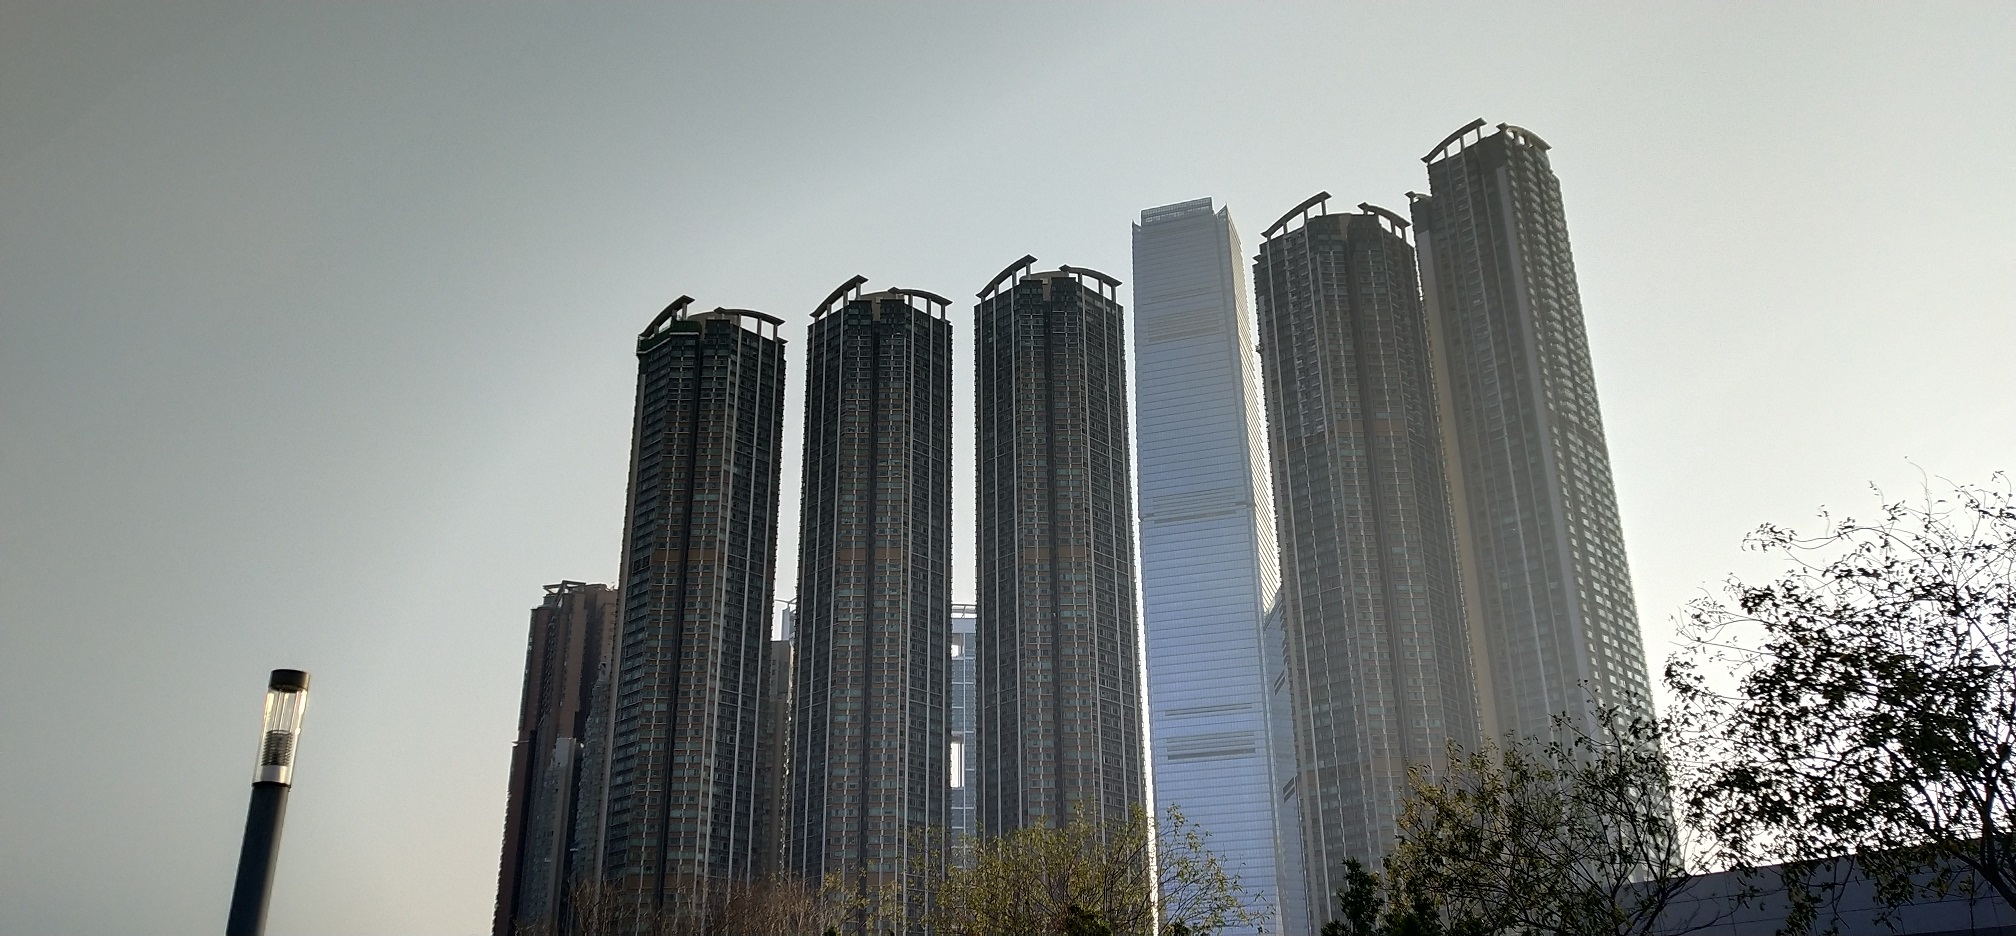 ICC and other high-rise residential buildings form the wall-effect.